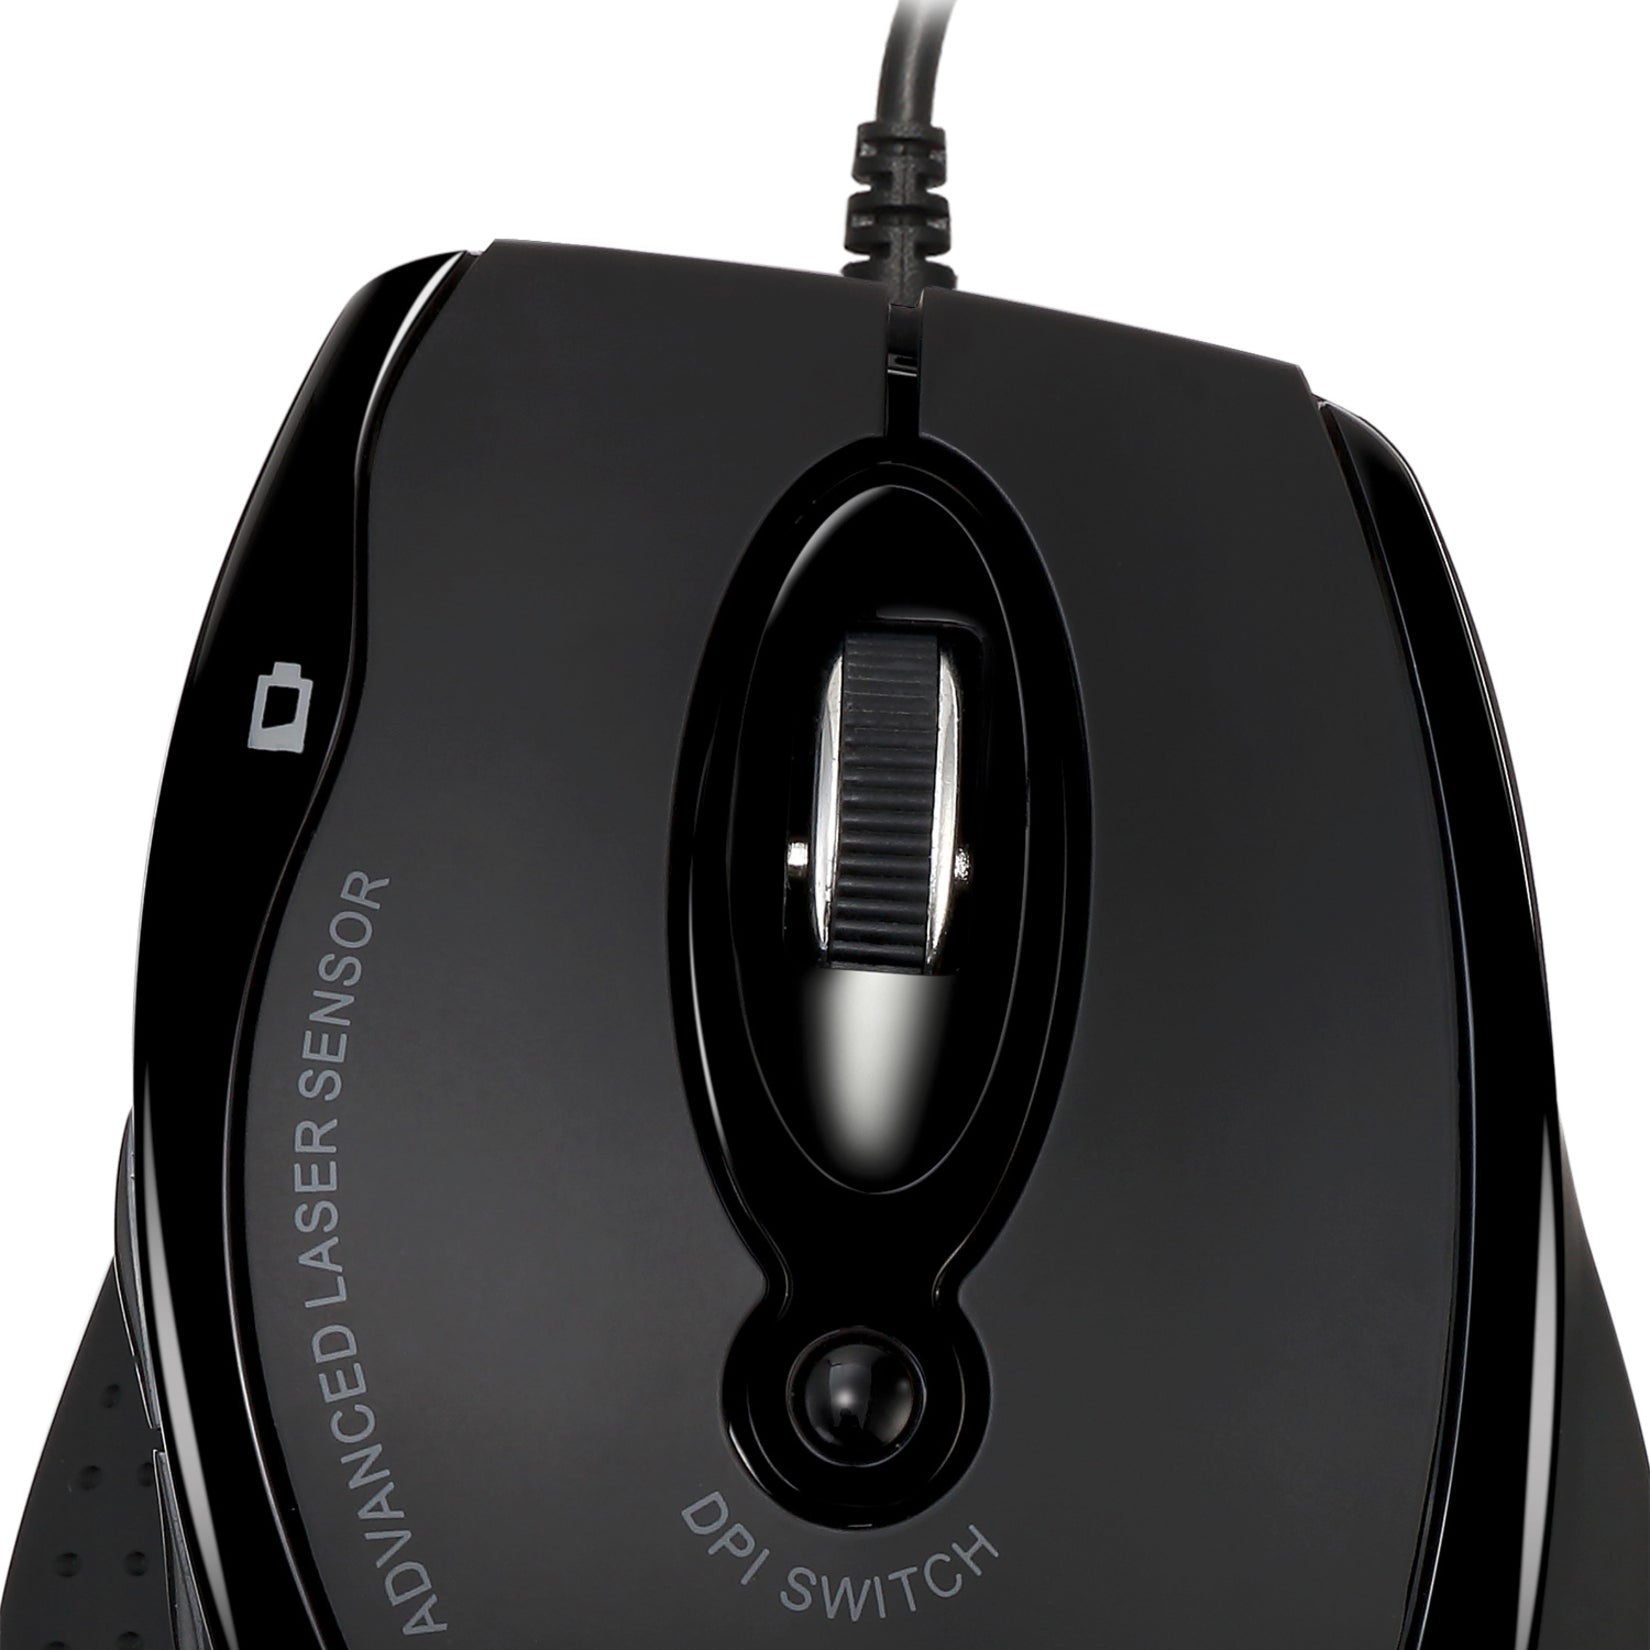 Adesso IMOUSE G2 Ergonomic Optical Mouse, 2400 DPI, 6 Buttons, USB Wired, Right-Handed Only